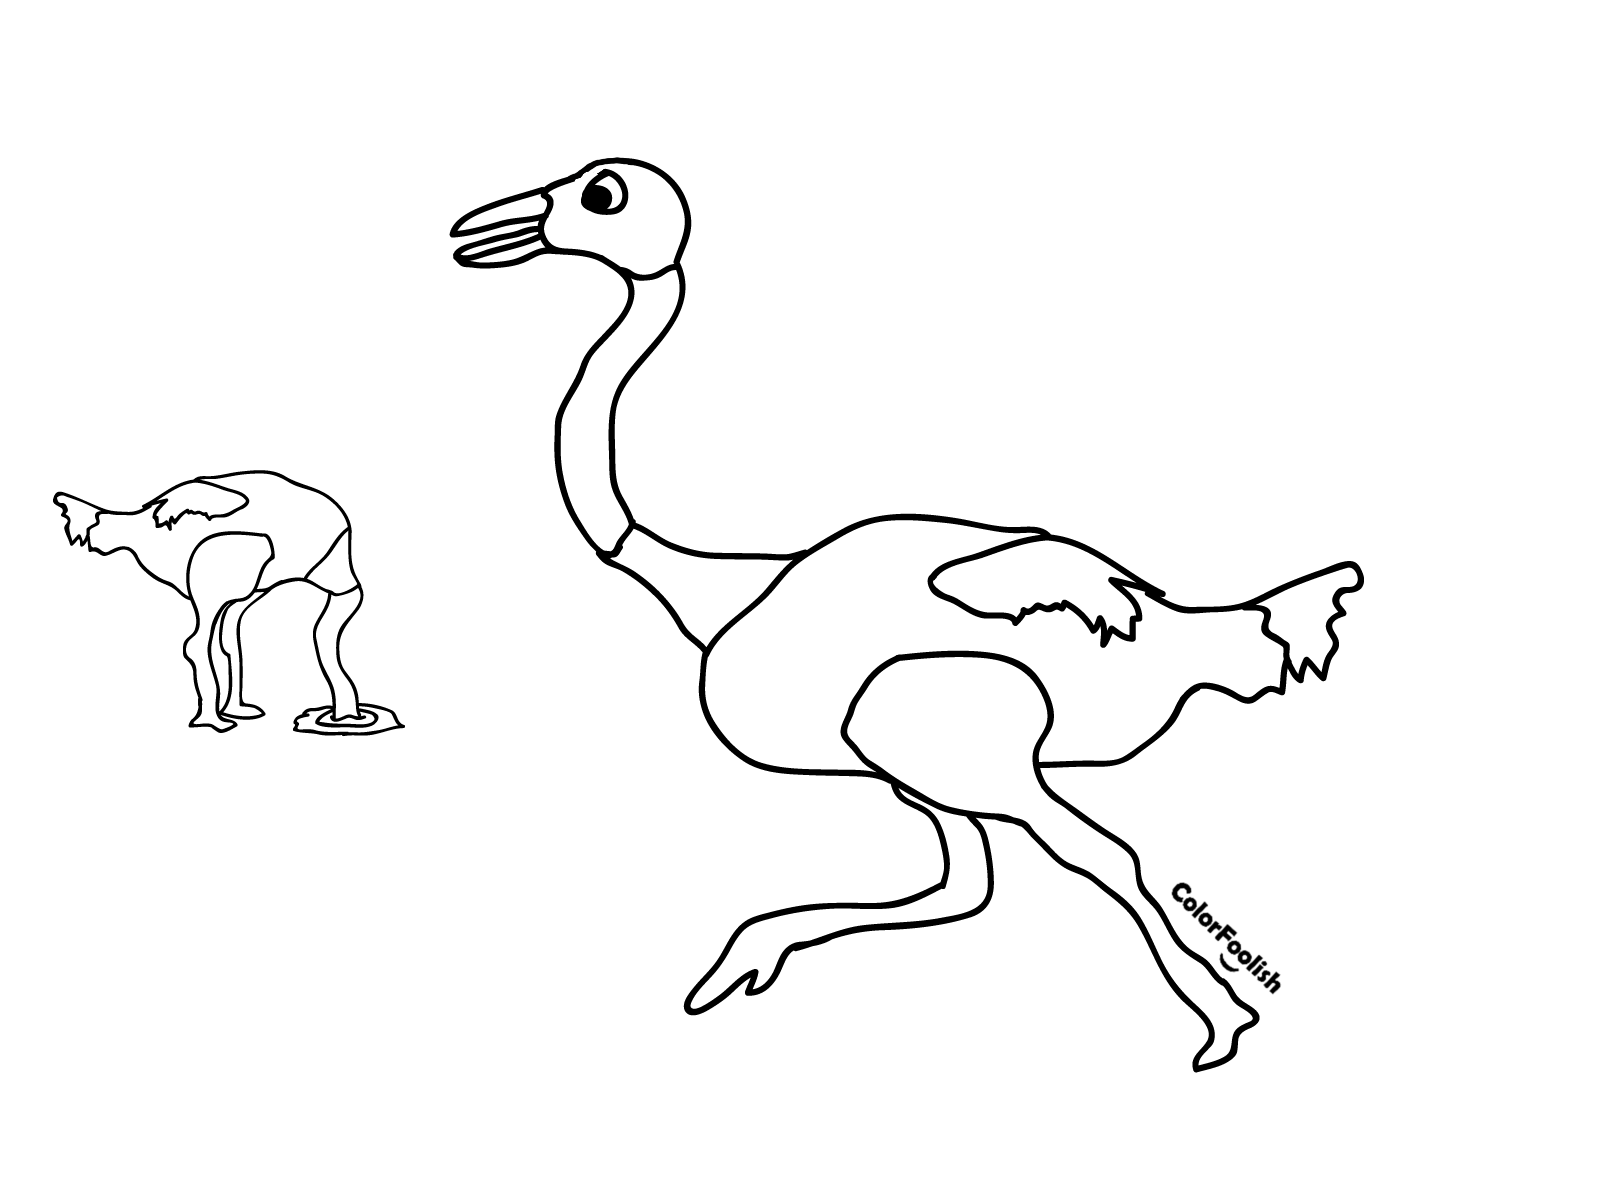 Coloring page of a running ostrich